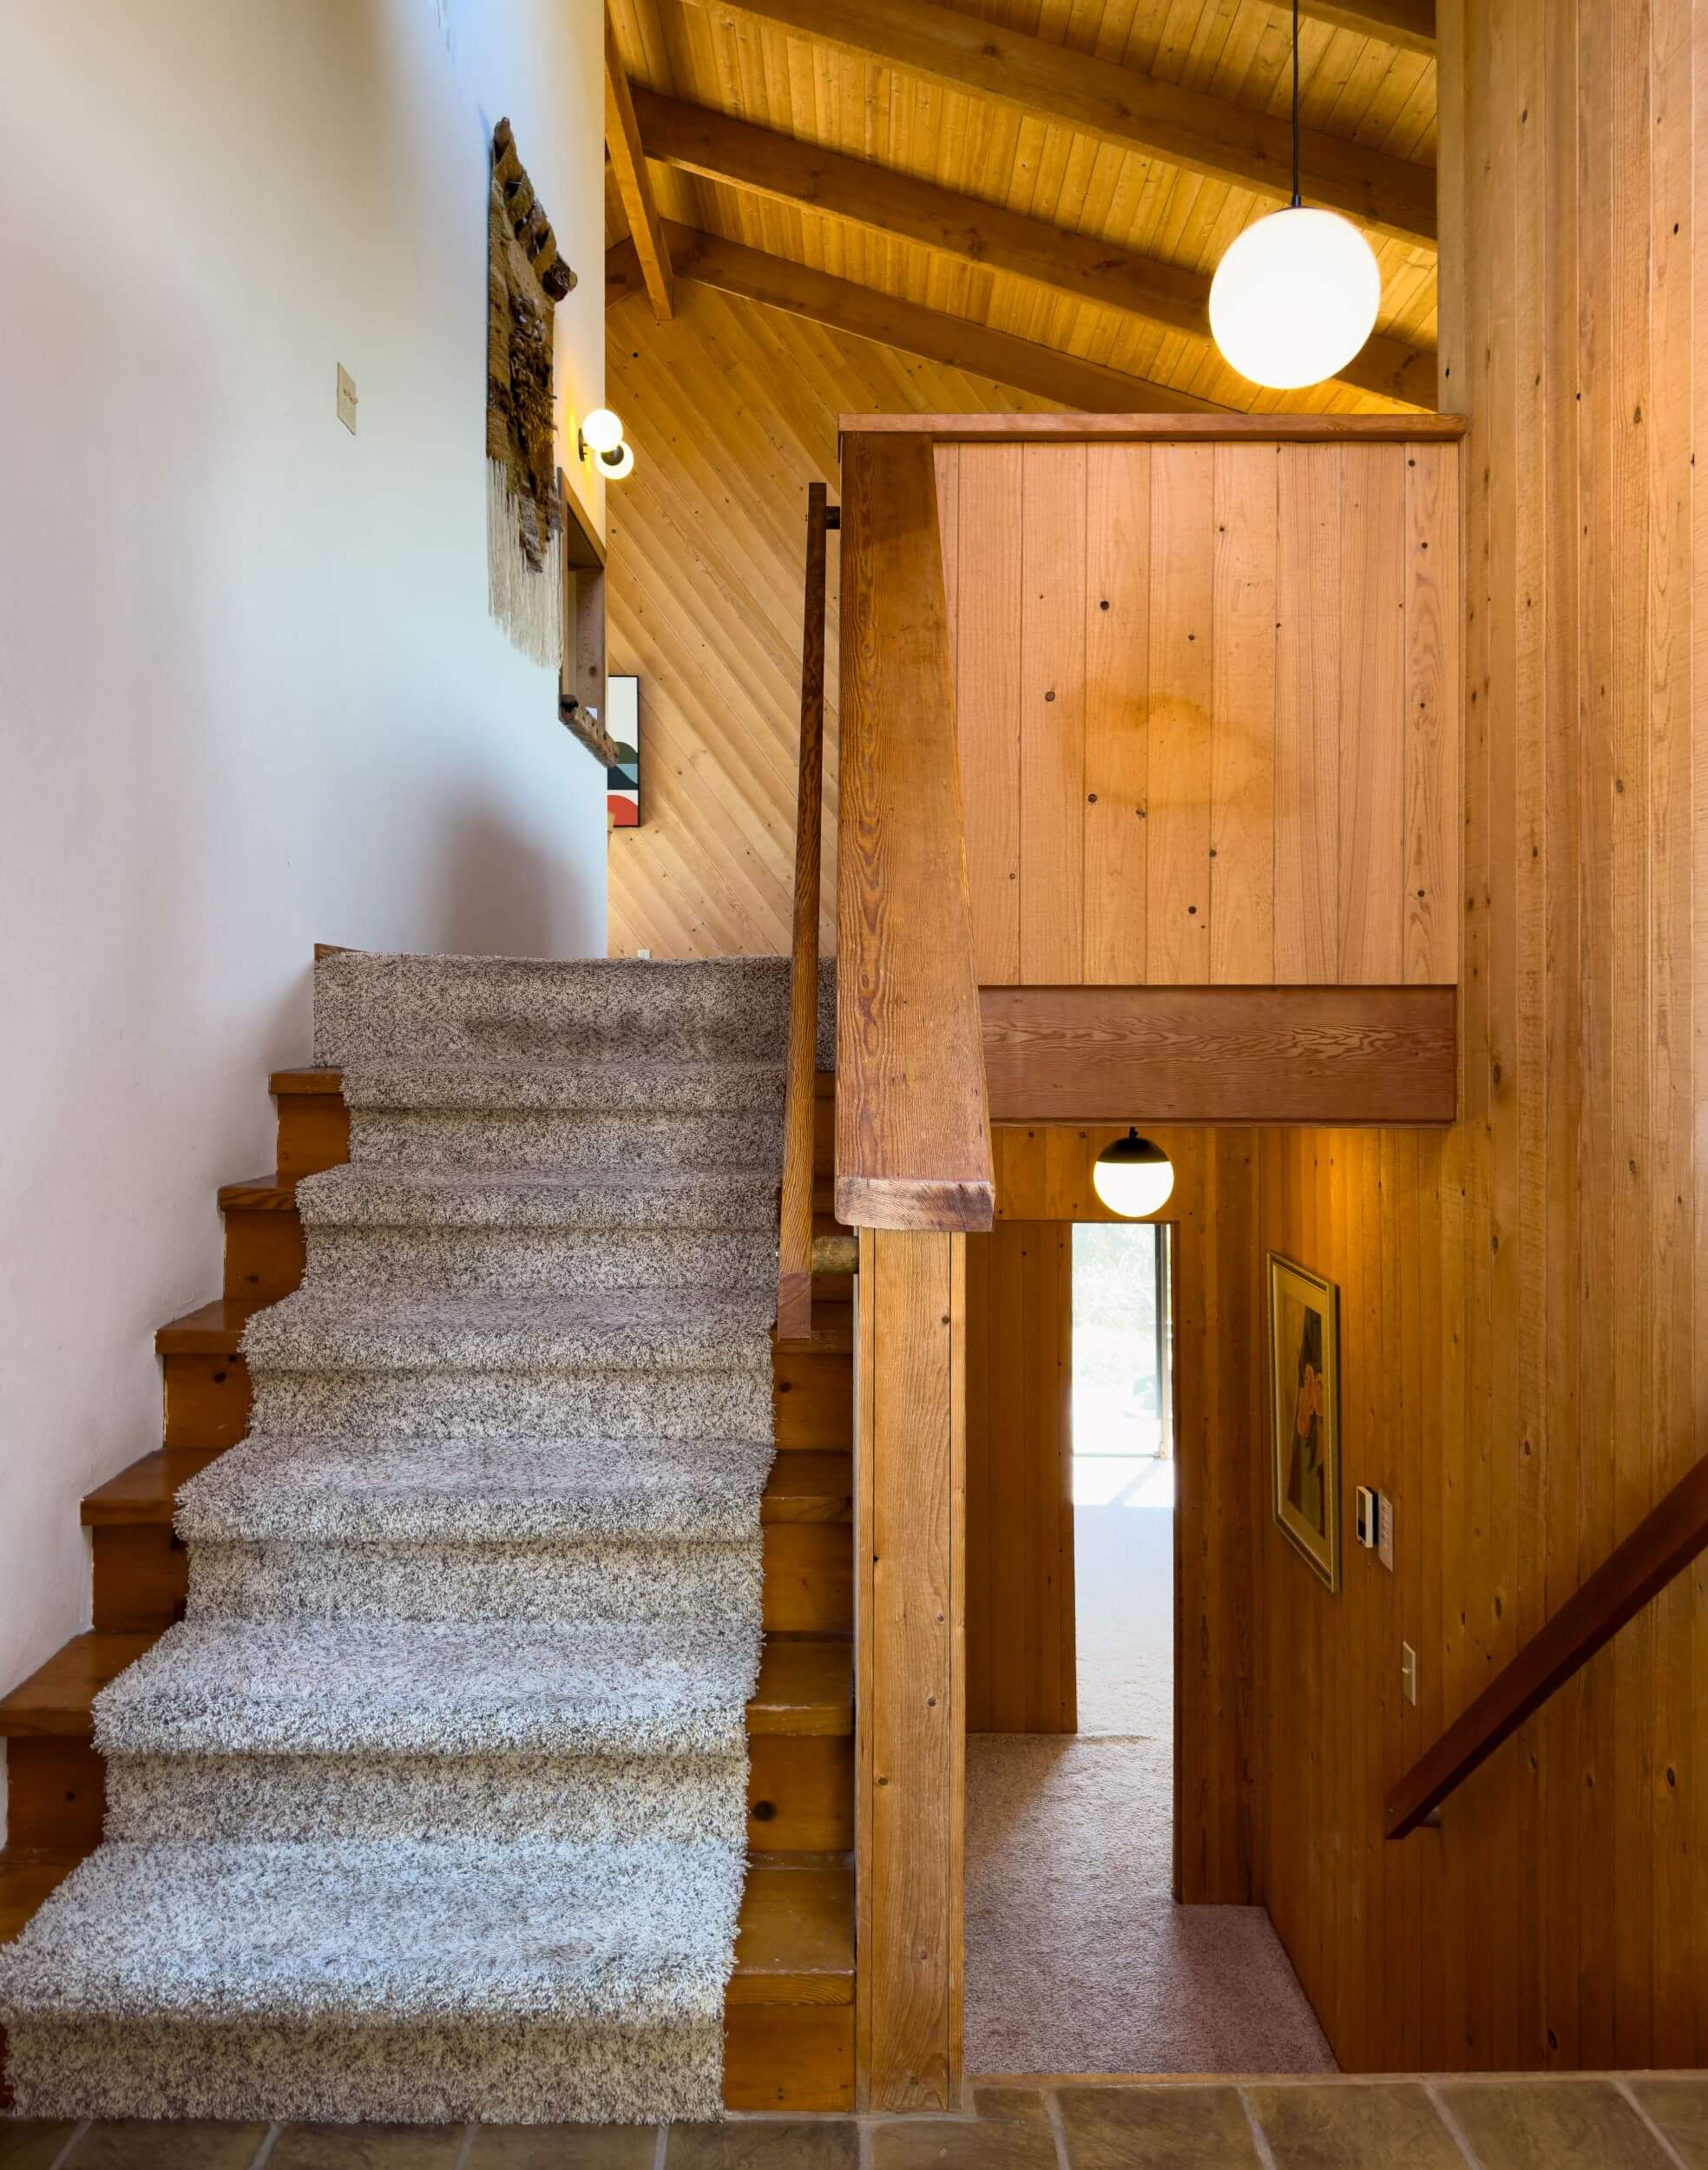 Sea Meadow: view of carpeted stairway to upper and lower floors, wood walls and ceilings.